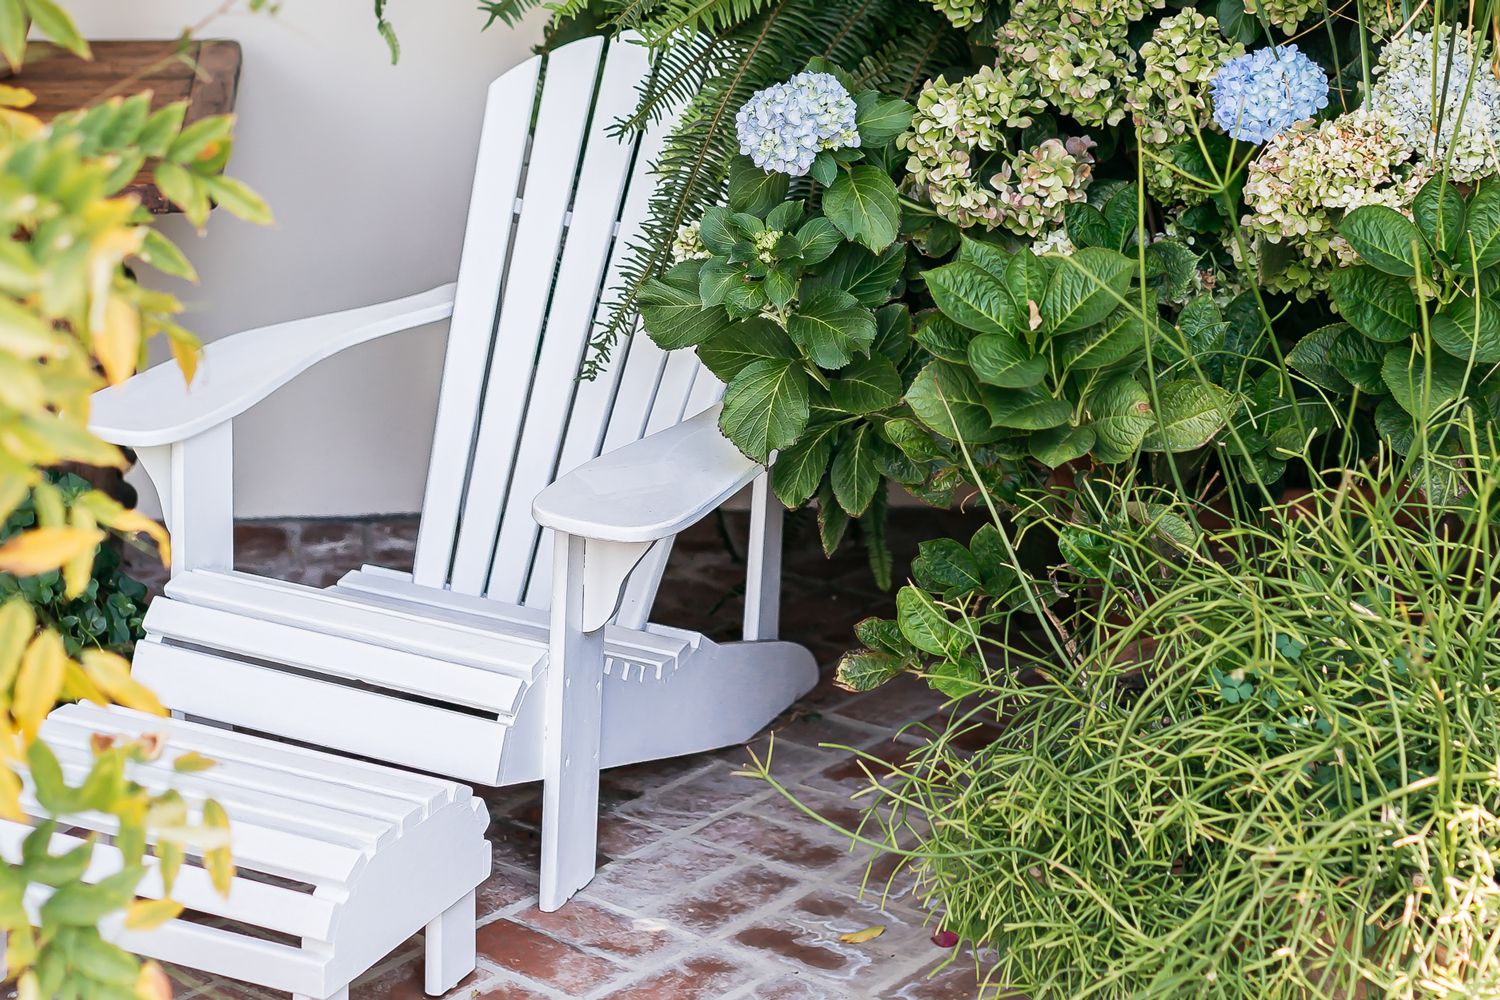 Enjoy the Outdoors With These 16 DIY Chair Plans